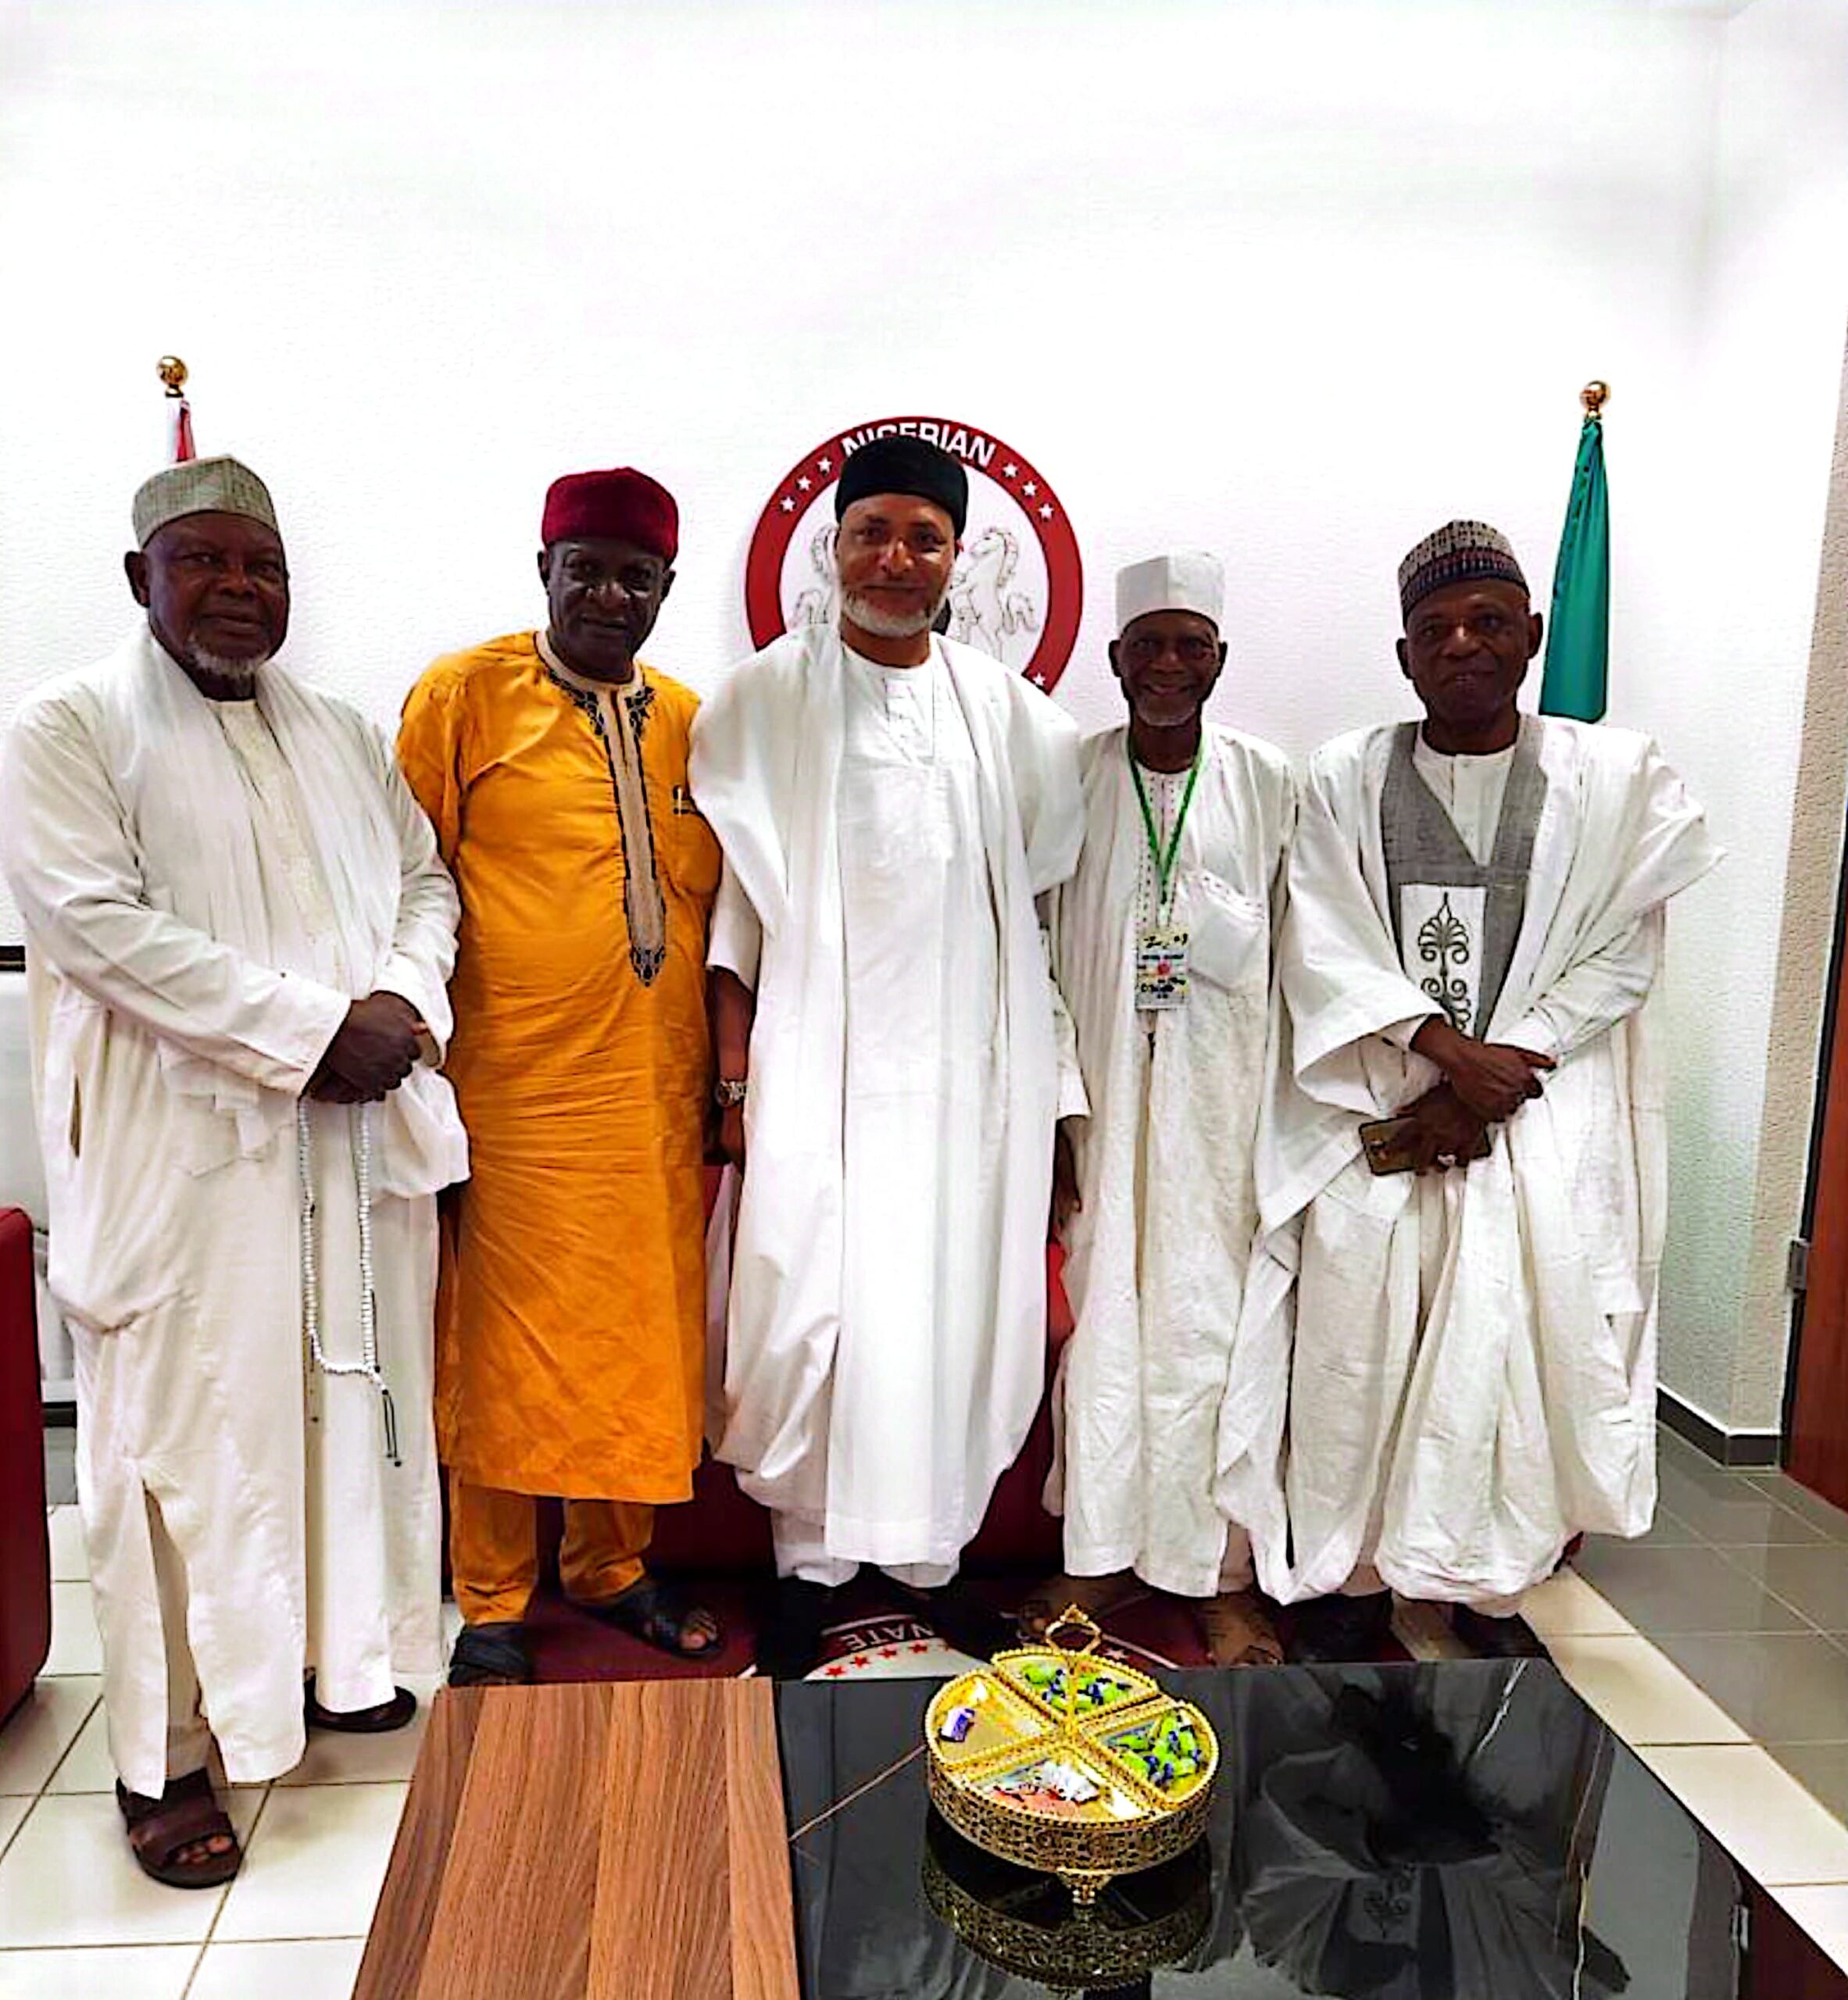 IEDPU visits Saliu Mustapha, urges support from all